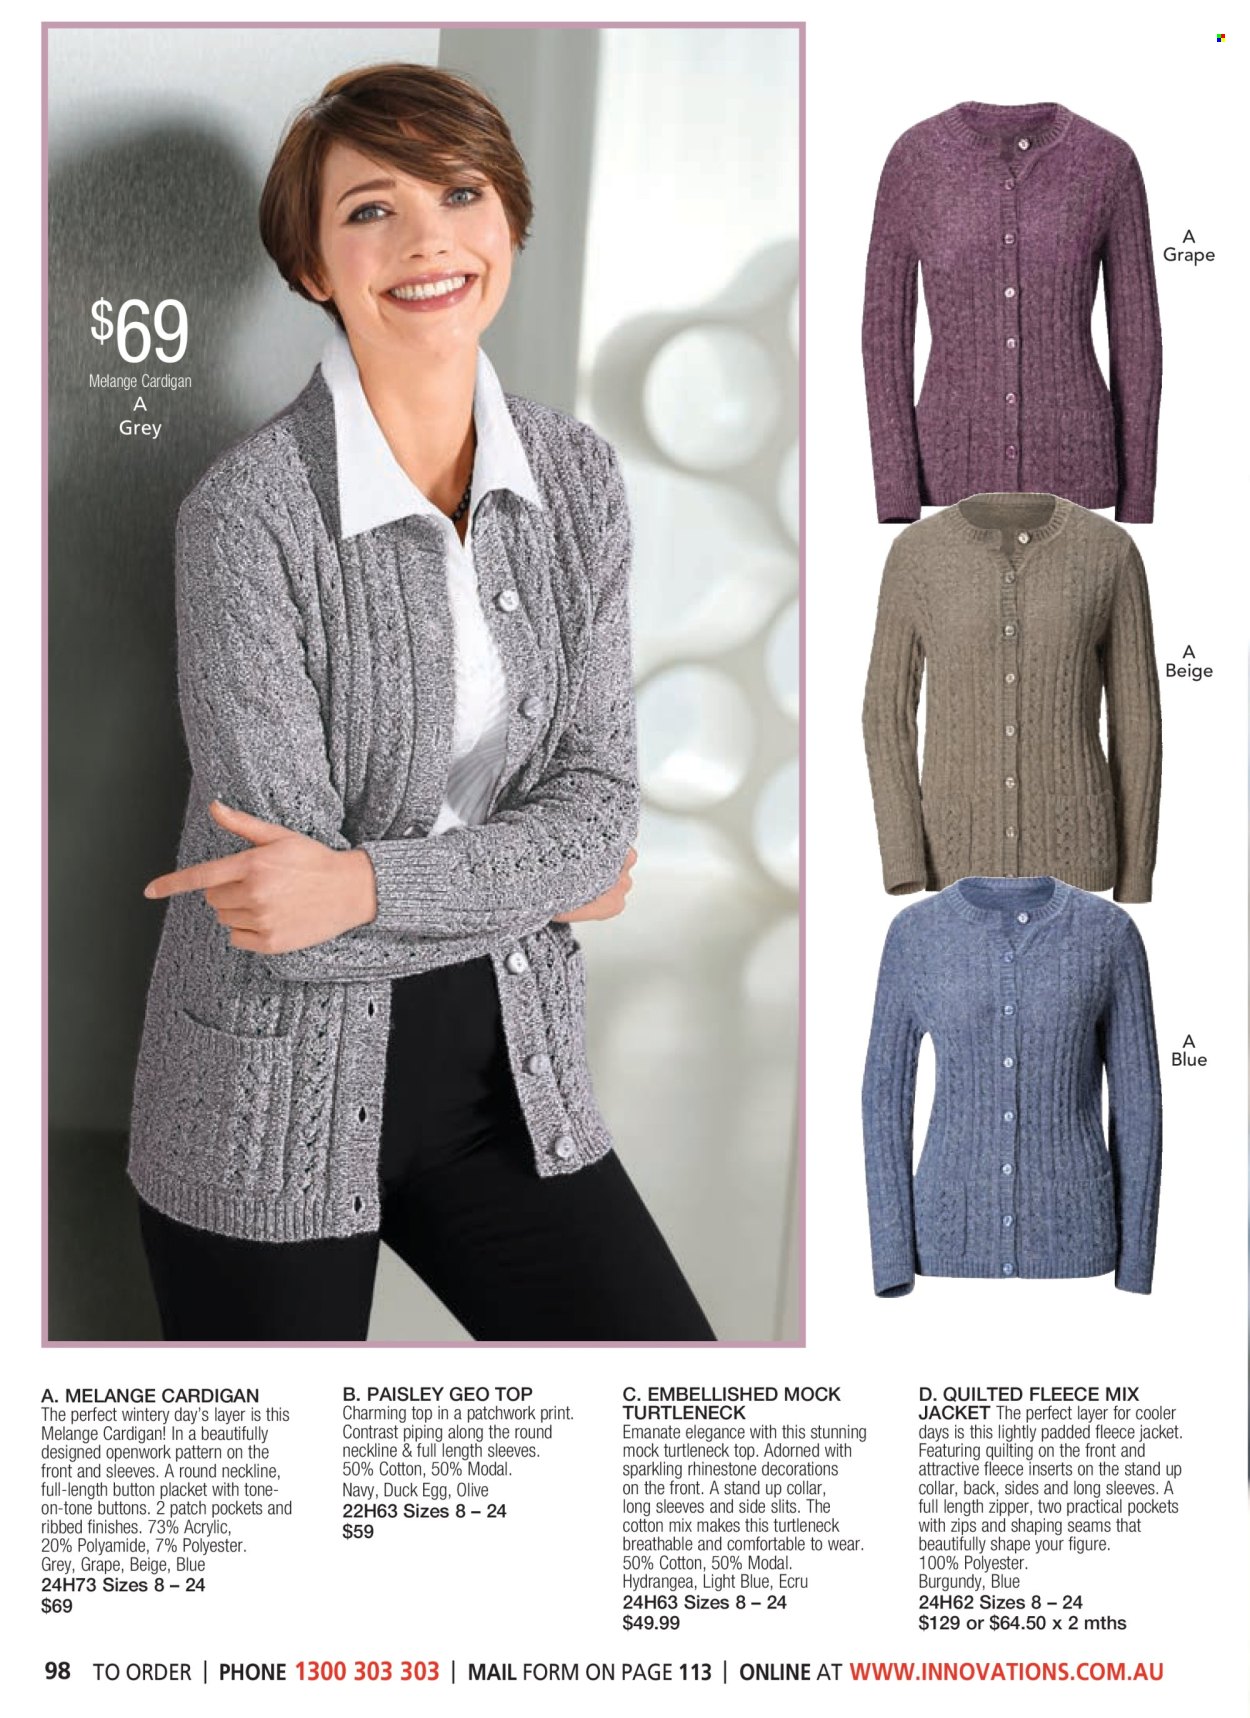 thumbnail - Innovations Catalogue - Sales products - jacket, cardigan, eggs. Page 98.